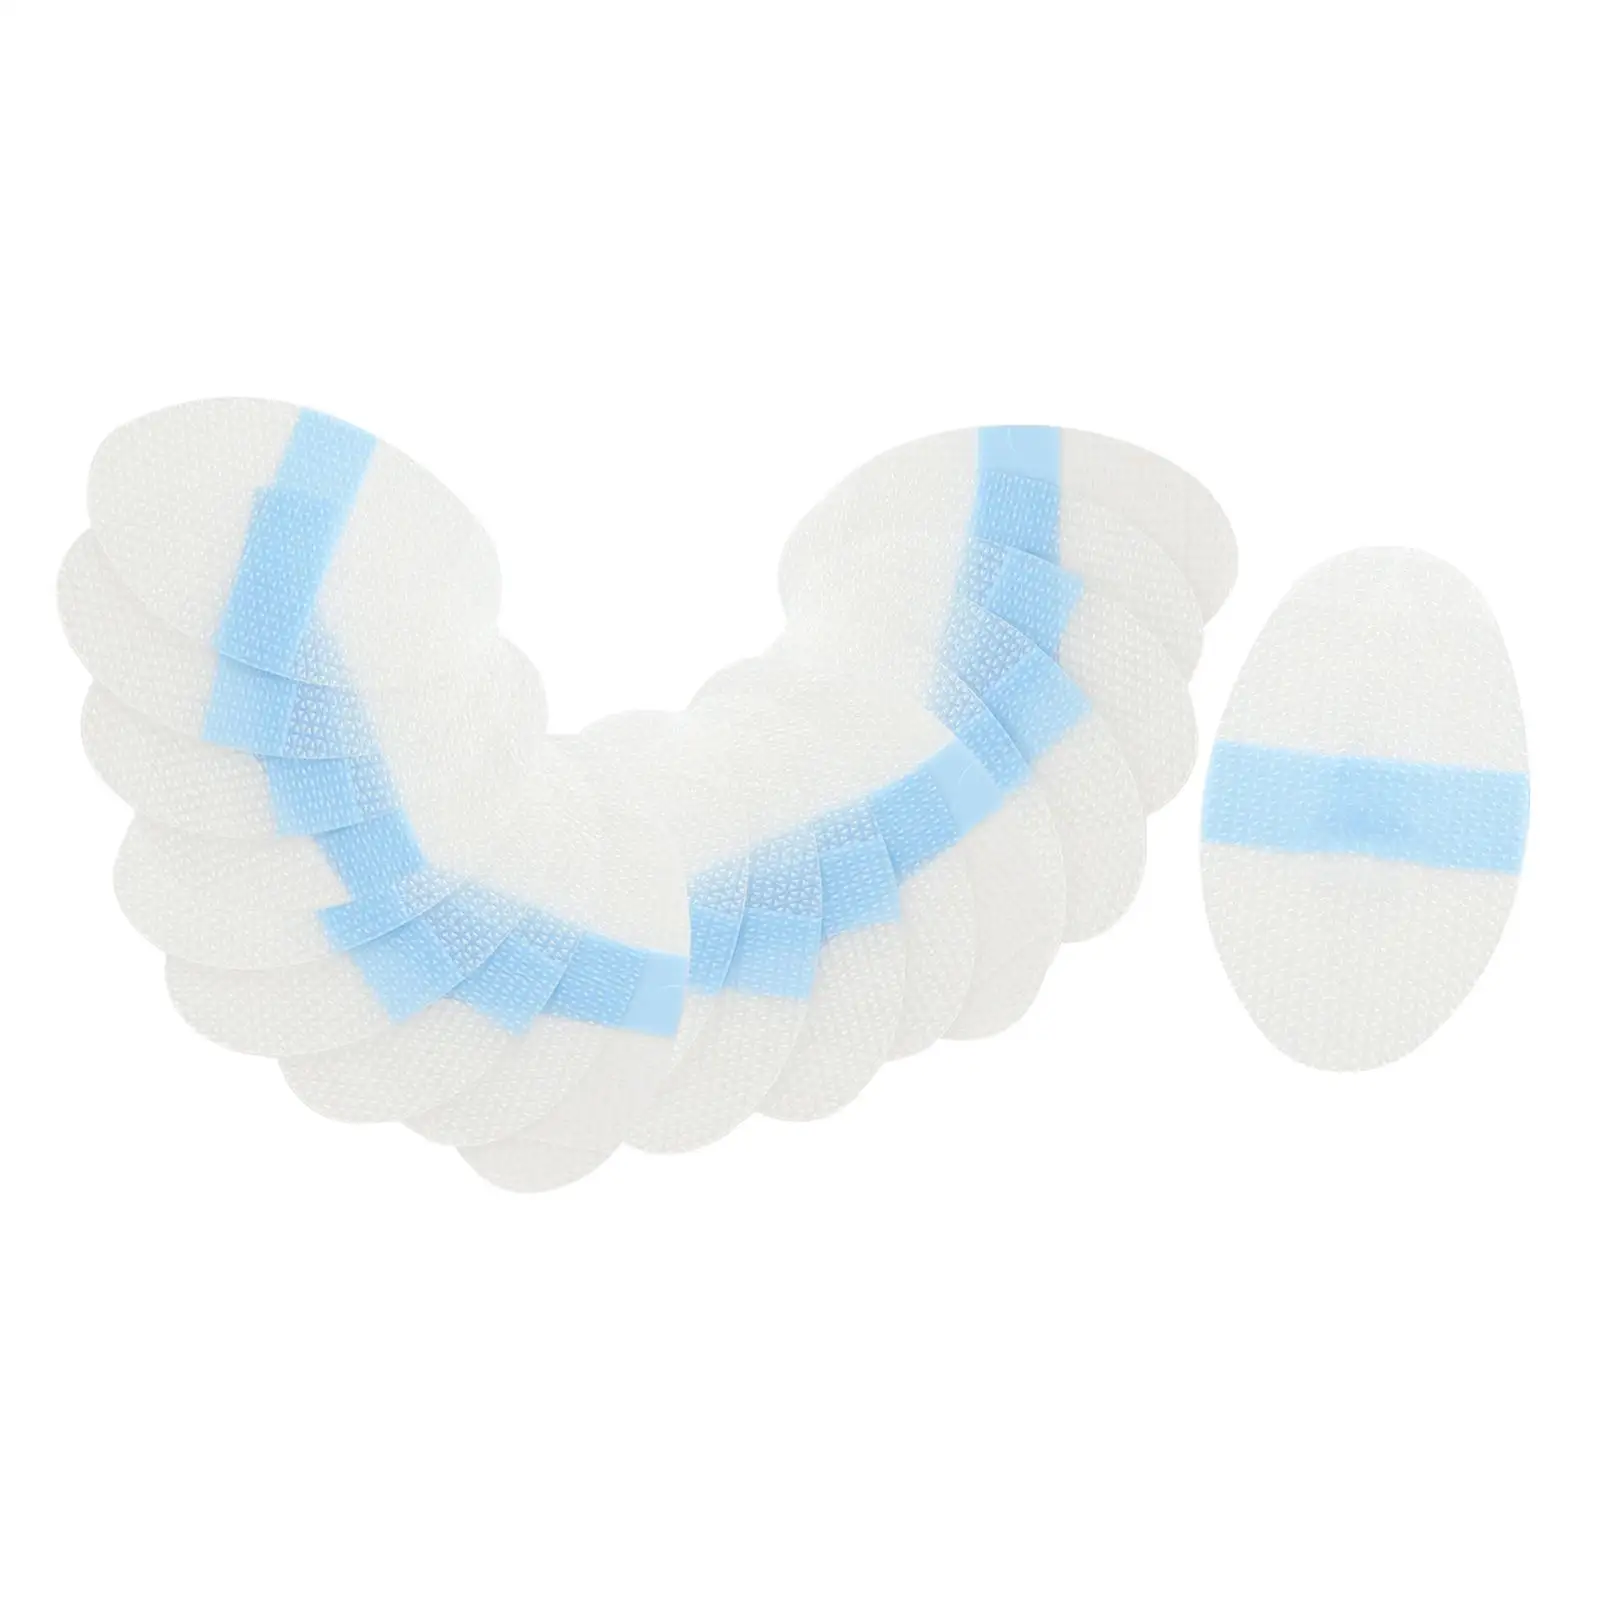 20 Pieces Waterproof Ear Stickers Ear Covers Portable Ear Protection Covers for Shower Swimming Water Surfing Children